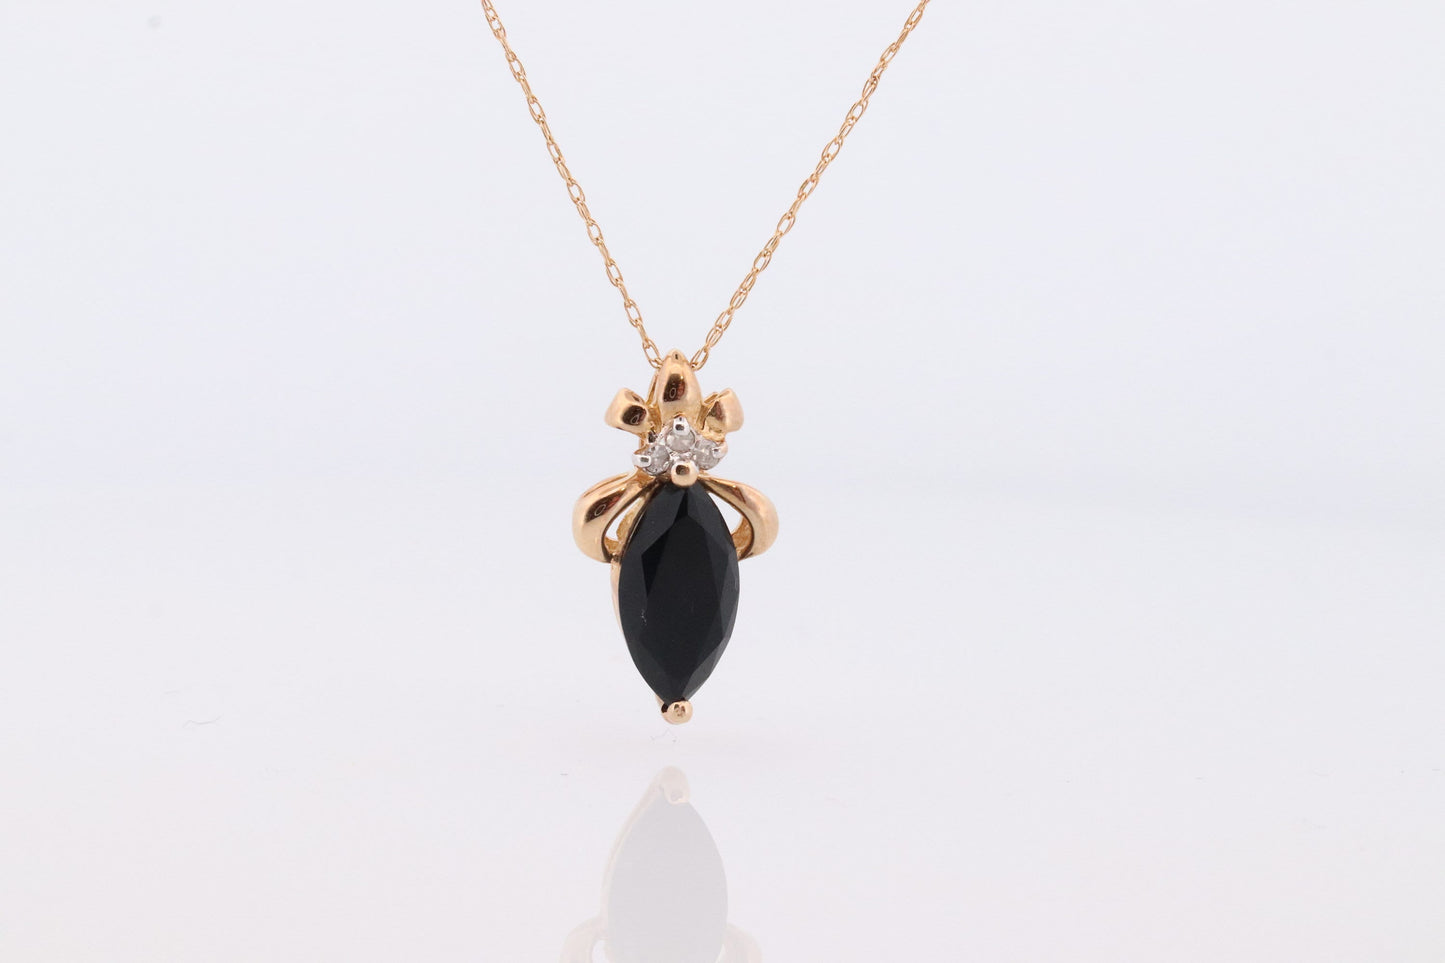 10k Onyx and Diamond Pendant. Marquise faceted Onyx and Diamond accent Pendant. Thin wheat chain necklace.